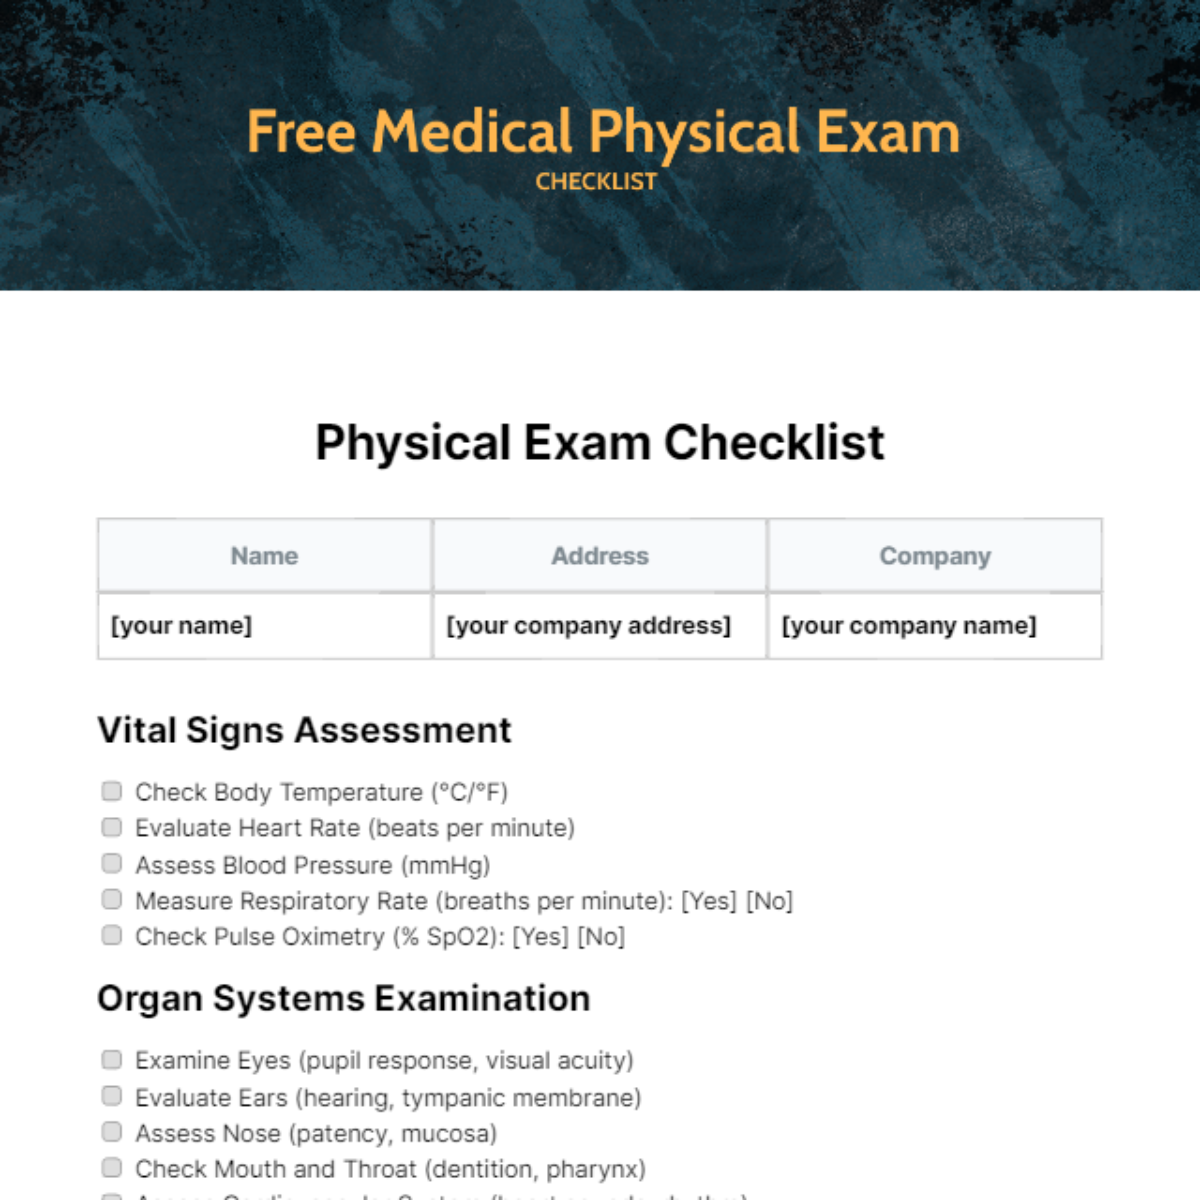 Free Medical Physical Exam Checklist Template